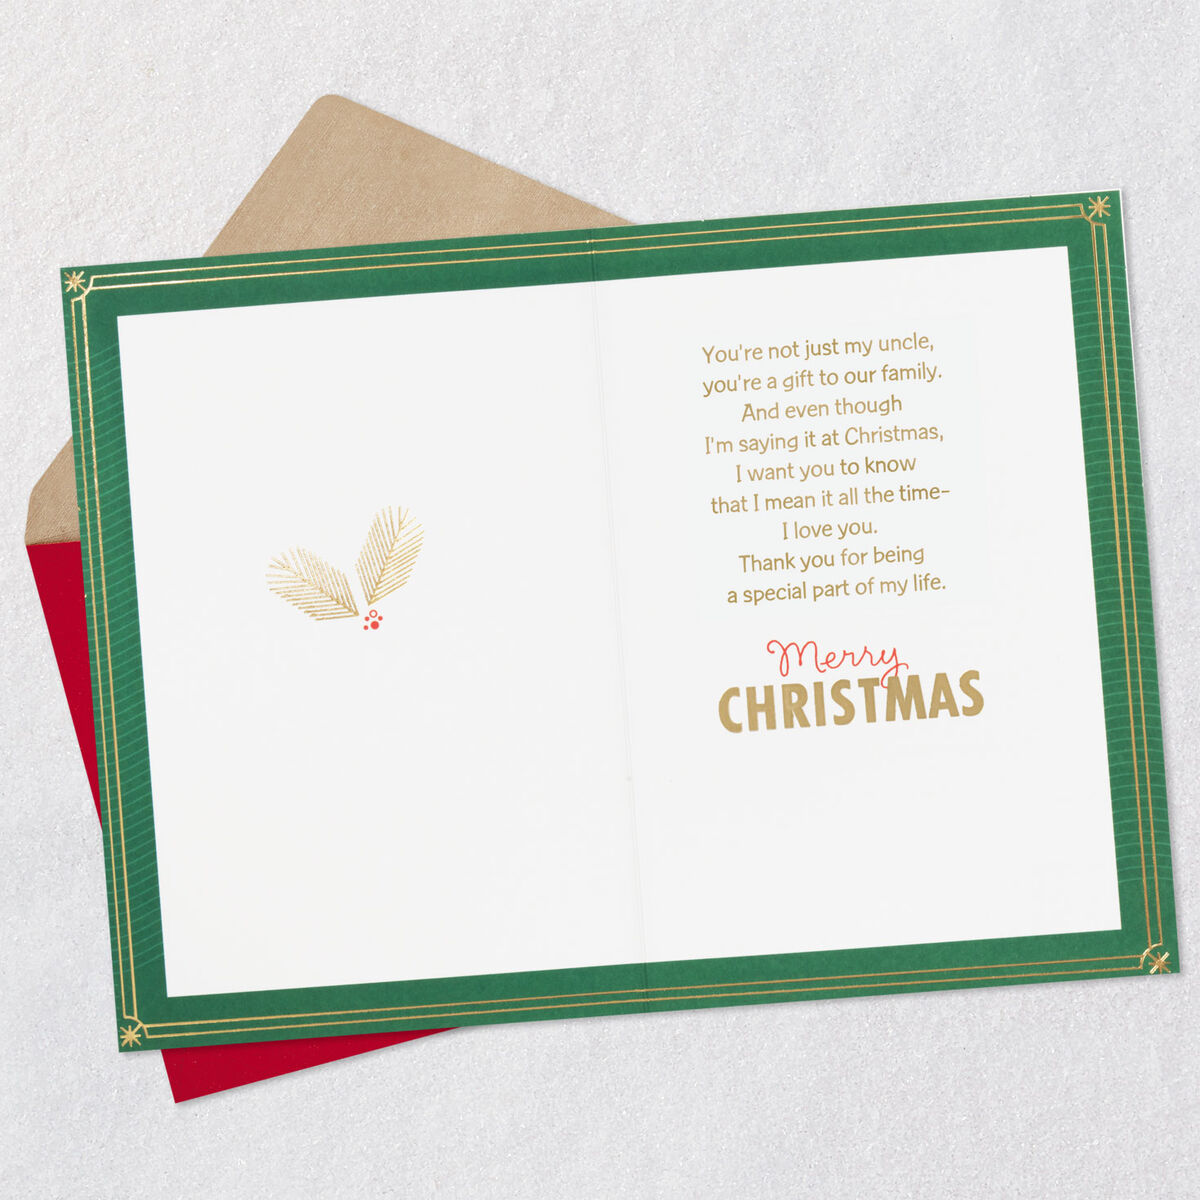 You're a Gift Christmas Card for Uncle - Greeting Cards - Hallmark